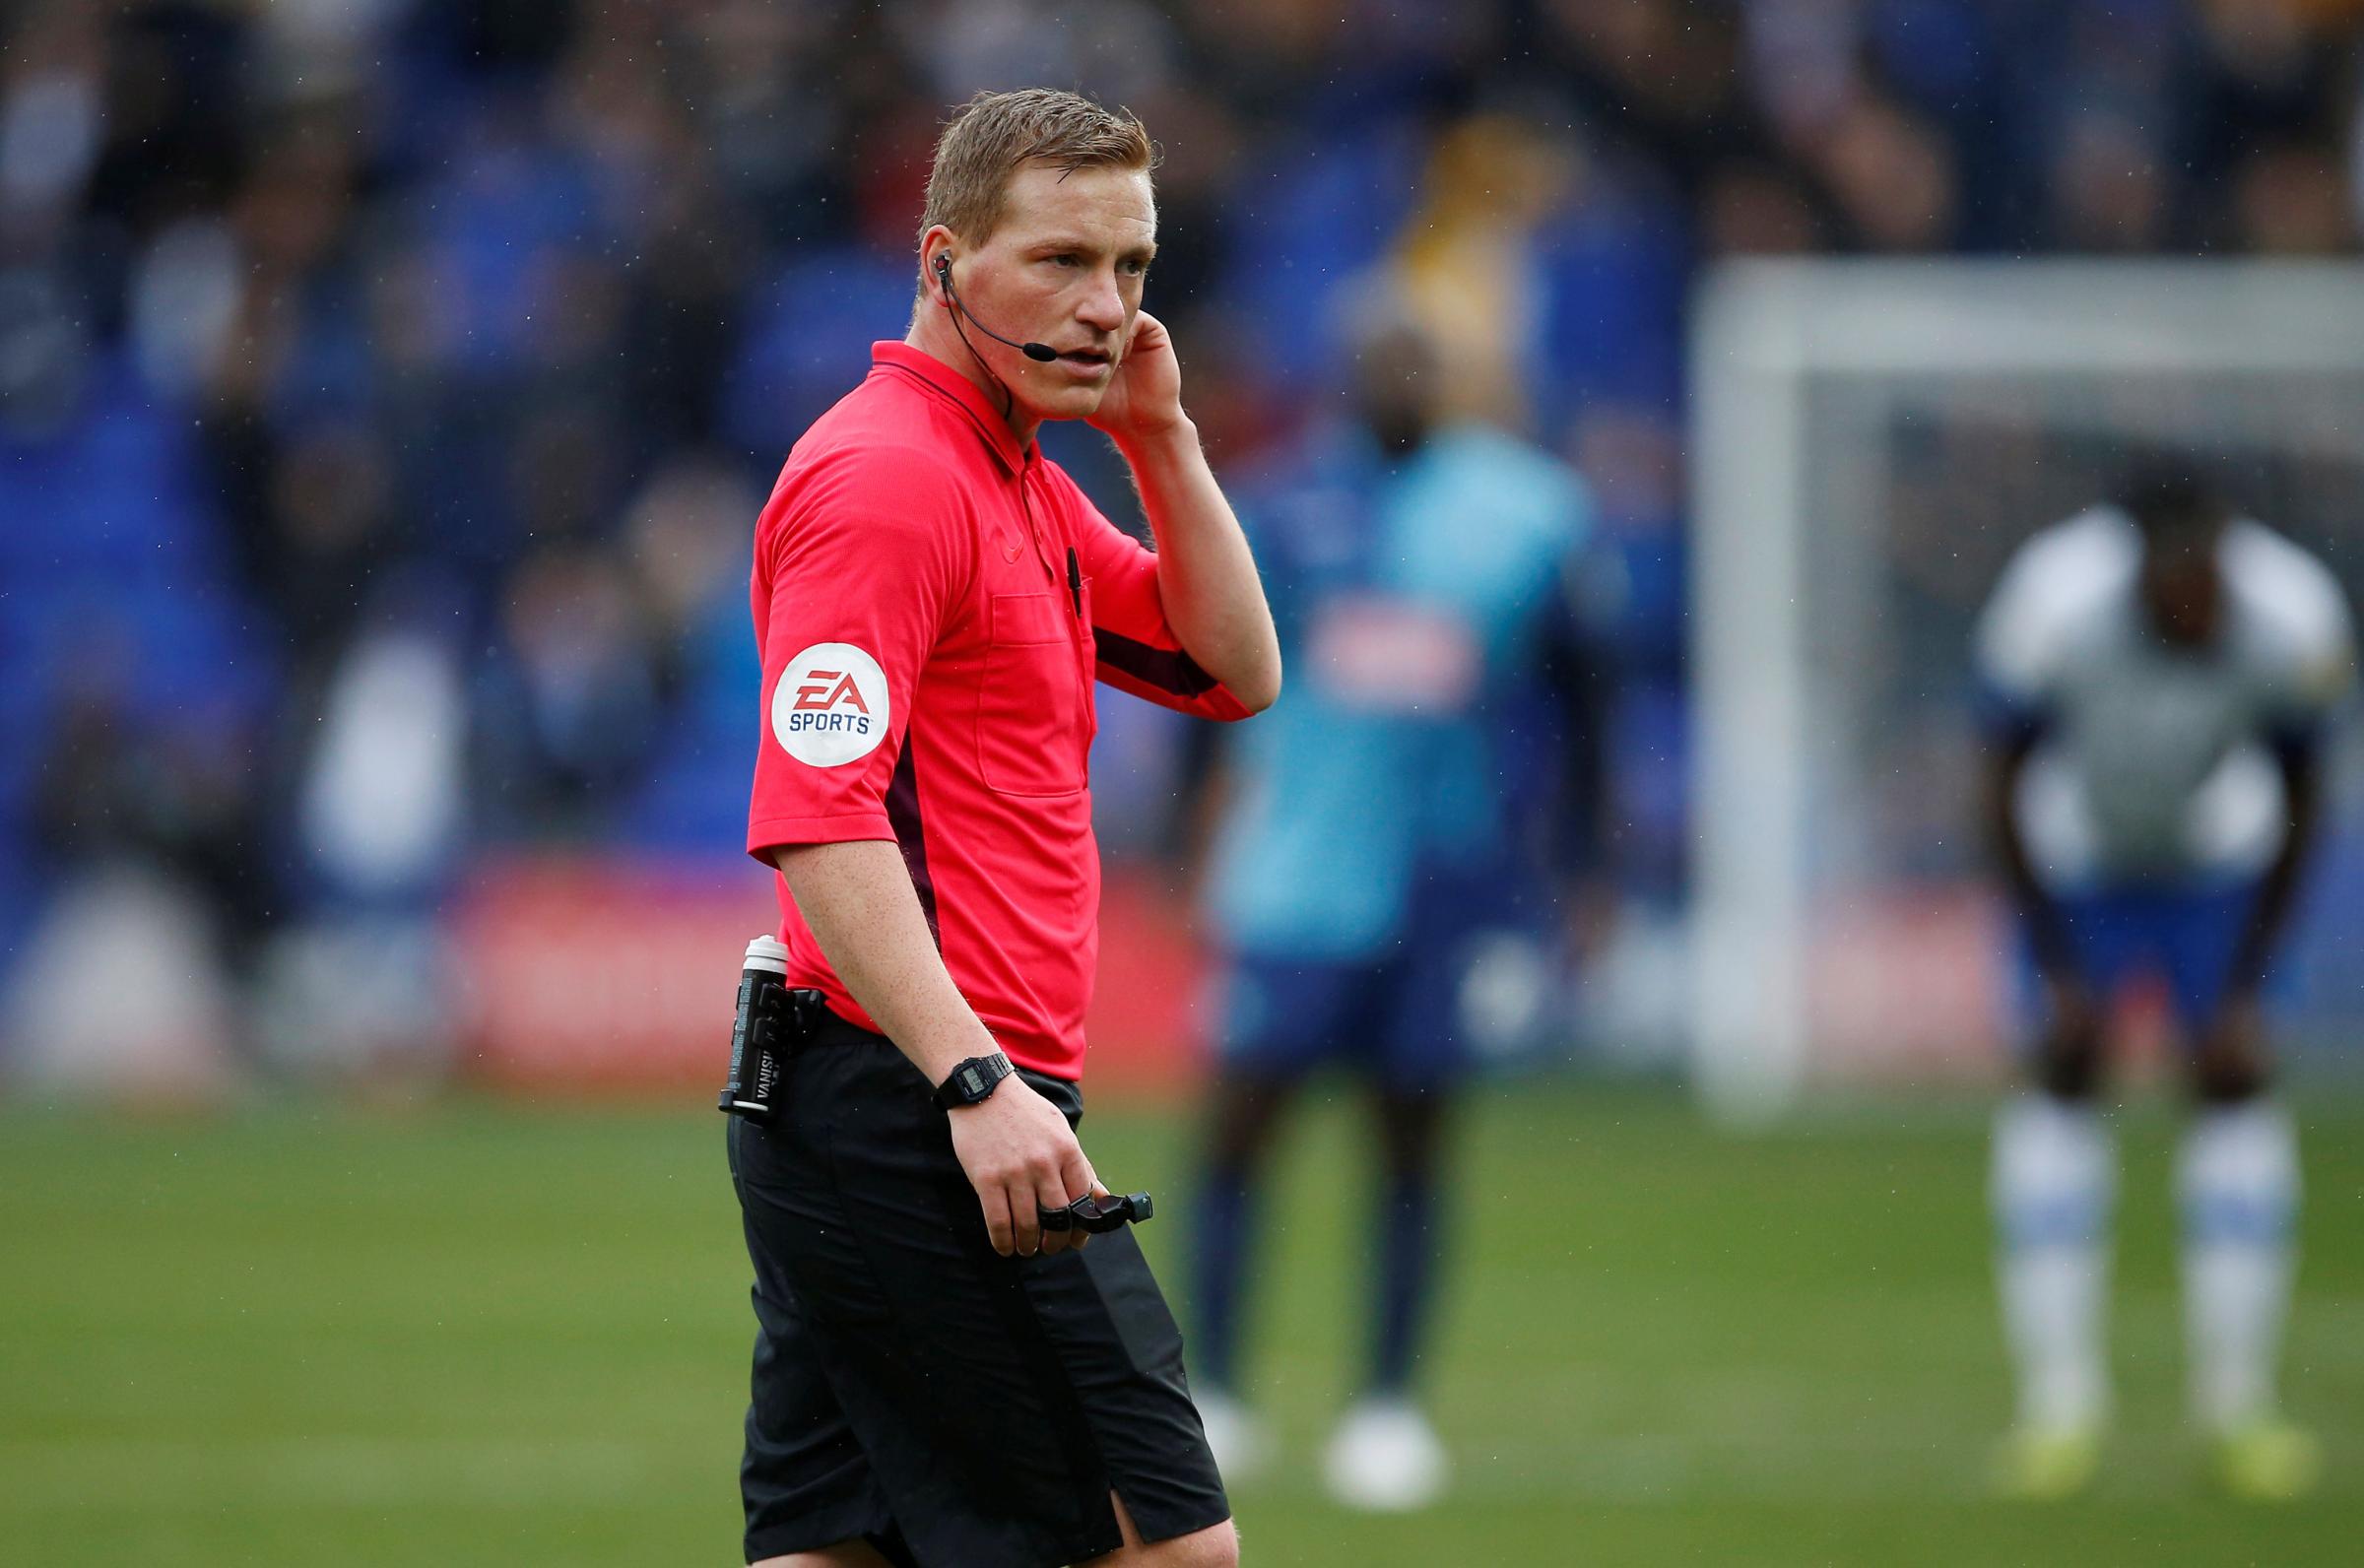 Busby to referee Watford's Championship clash with Sunderland